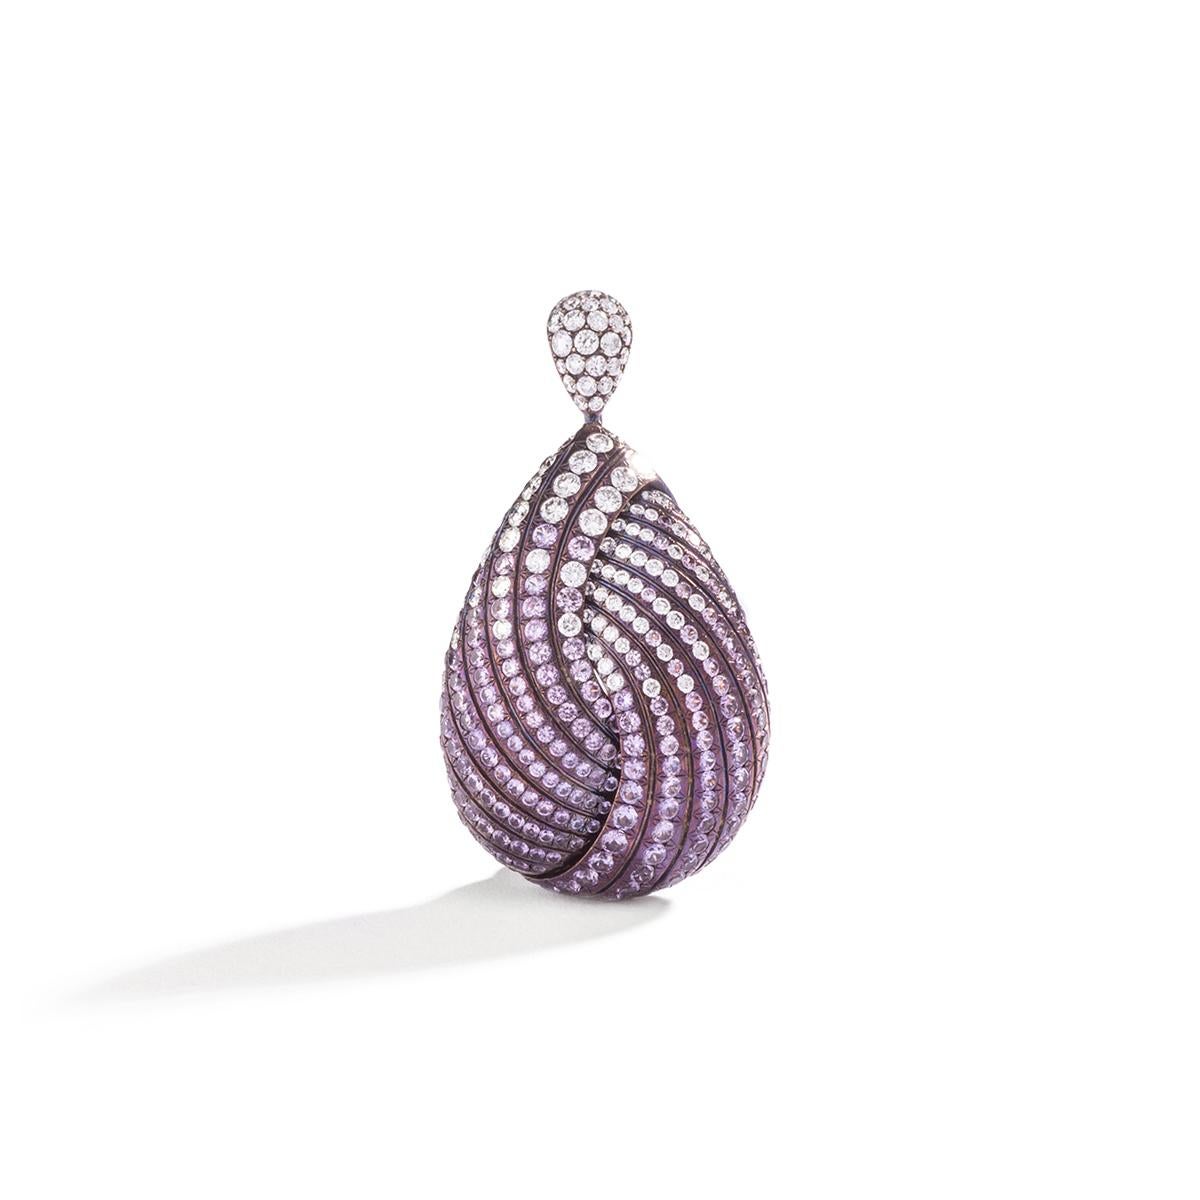 Adler Diamond and Pink Purple Sapphire on Titanium and Gold Pendant.
Signed Adler.

Total height: 1.97 inch (5.00 centimeters).
Width at maximum: 0.98 inch (2.50 centimeters).
Total weight: 10.65 grams.